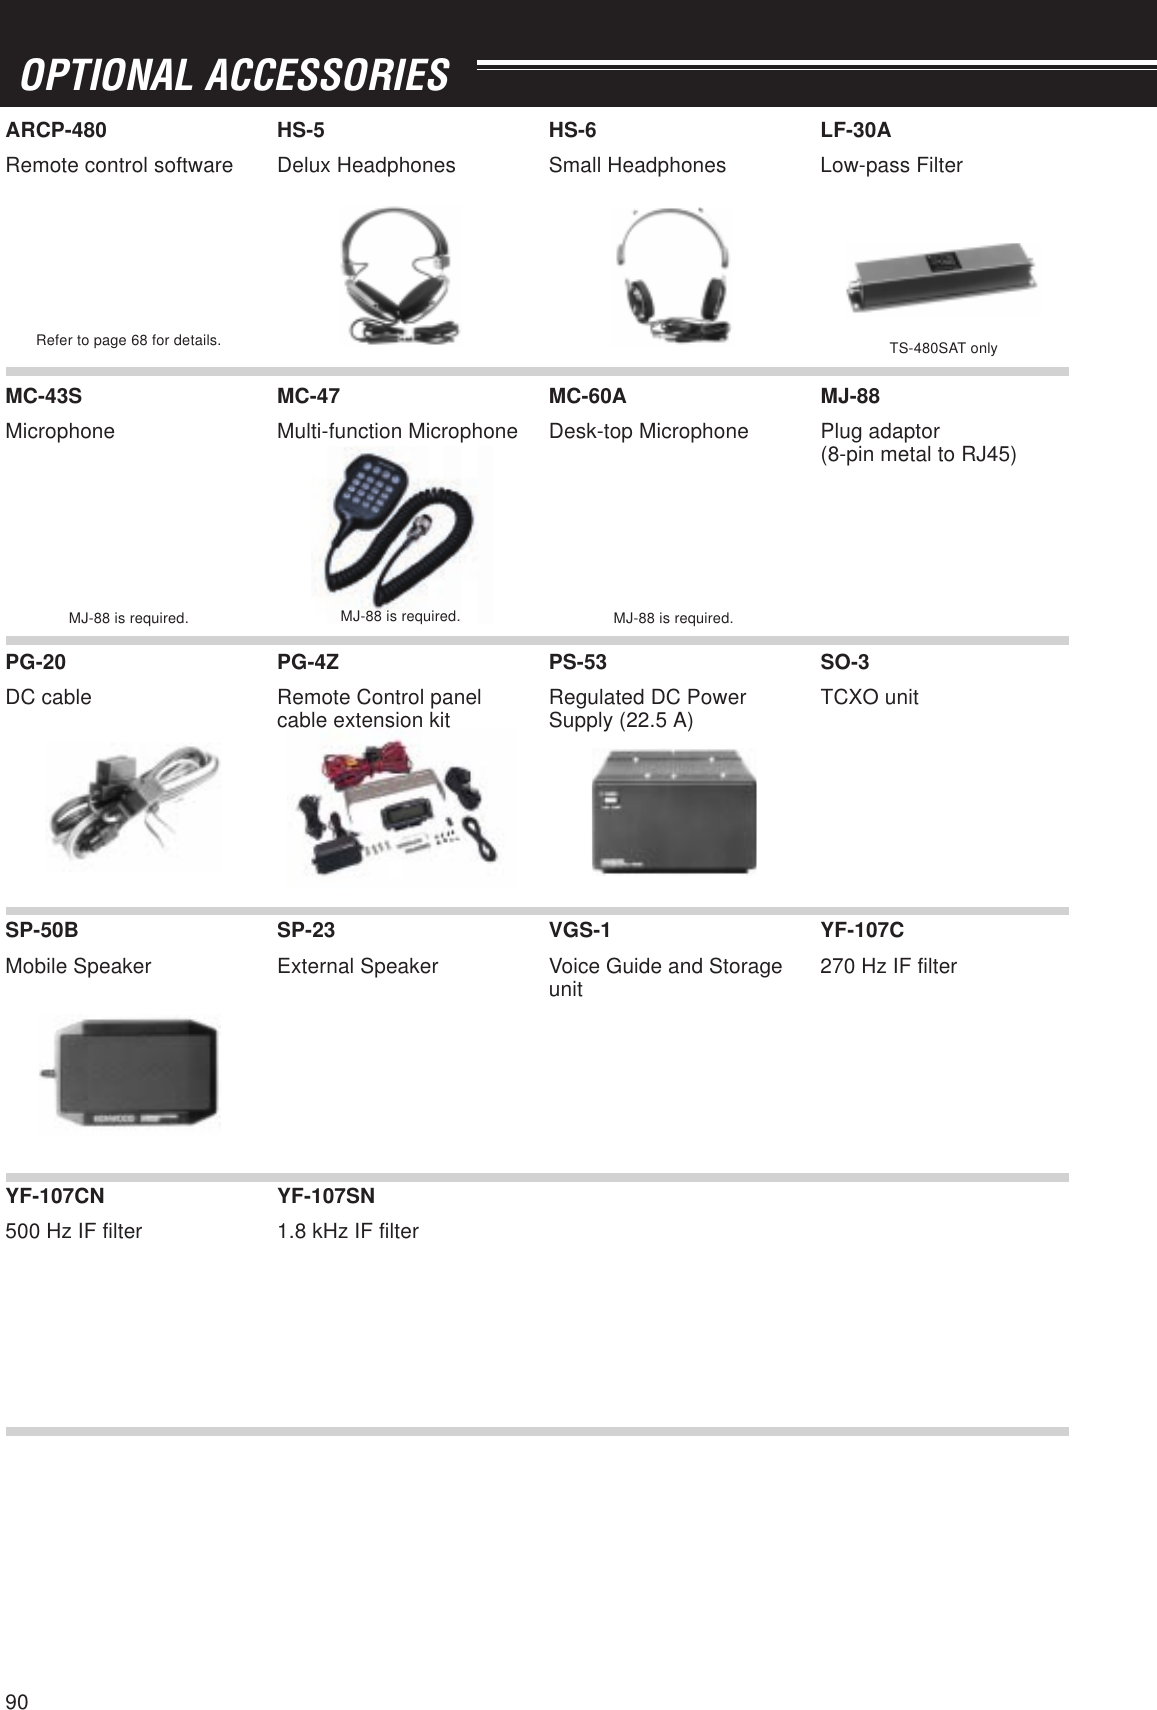 90OPTIONAL ACCESSORIESPS-53Regulated DC PowerSupply (22.5 A)HS-6Small HeadphonesSP-50BMobile SpeakerMC-47Multi-function MicrophonePG-4ZRemote Control panelcable extension kitRefer to page 68 for details.ARCP-480Remote control softwareYF-107C270 Hz IF filterYF-107CN500 Hz IF filterYF-107SN1.8 kHz IF filterPG-20DC cableSO-3TCXO unitMC-60ADesk-top MicrophoneMJ-88Plug adaptor(8-pin metal to RJ45)SP-23External SpeakerVGS-1Voice Guide and StorageunitMJ-88 is required. MJ-88 is required.HS-5Delux HeadphonesMC-43SMicrophoneLF-30ALow-pass FilterMJ-88 is required.TS-480SAT only